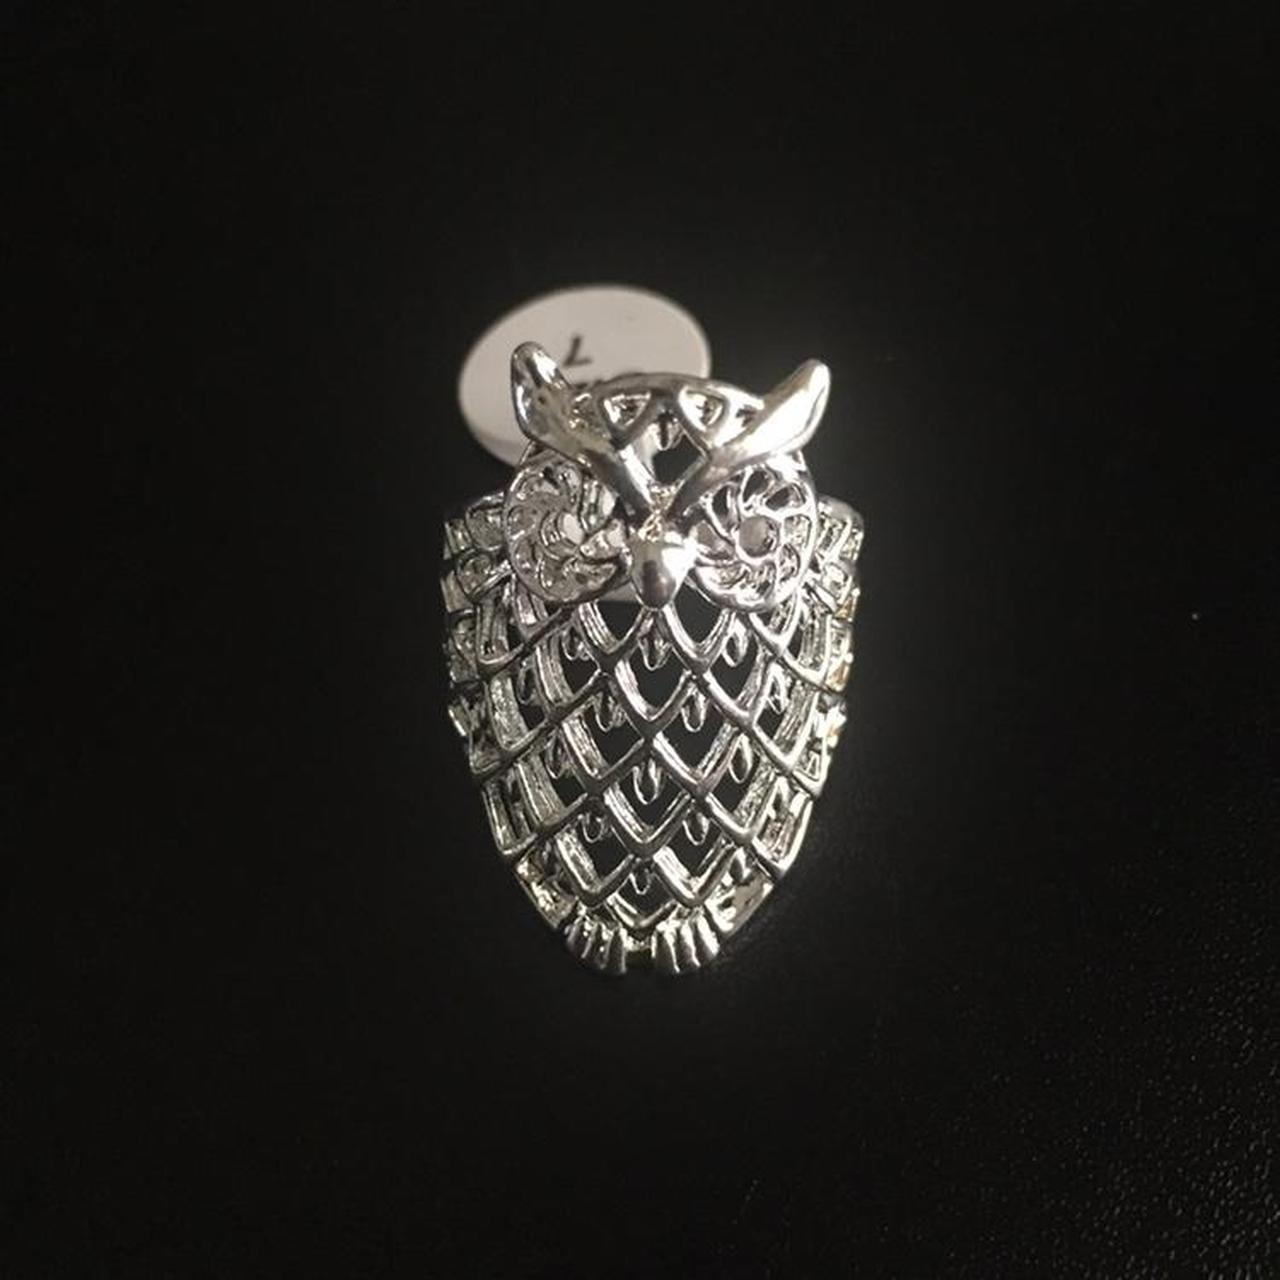 Product Image 3 - Silver owl ring size 7
Condition: